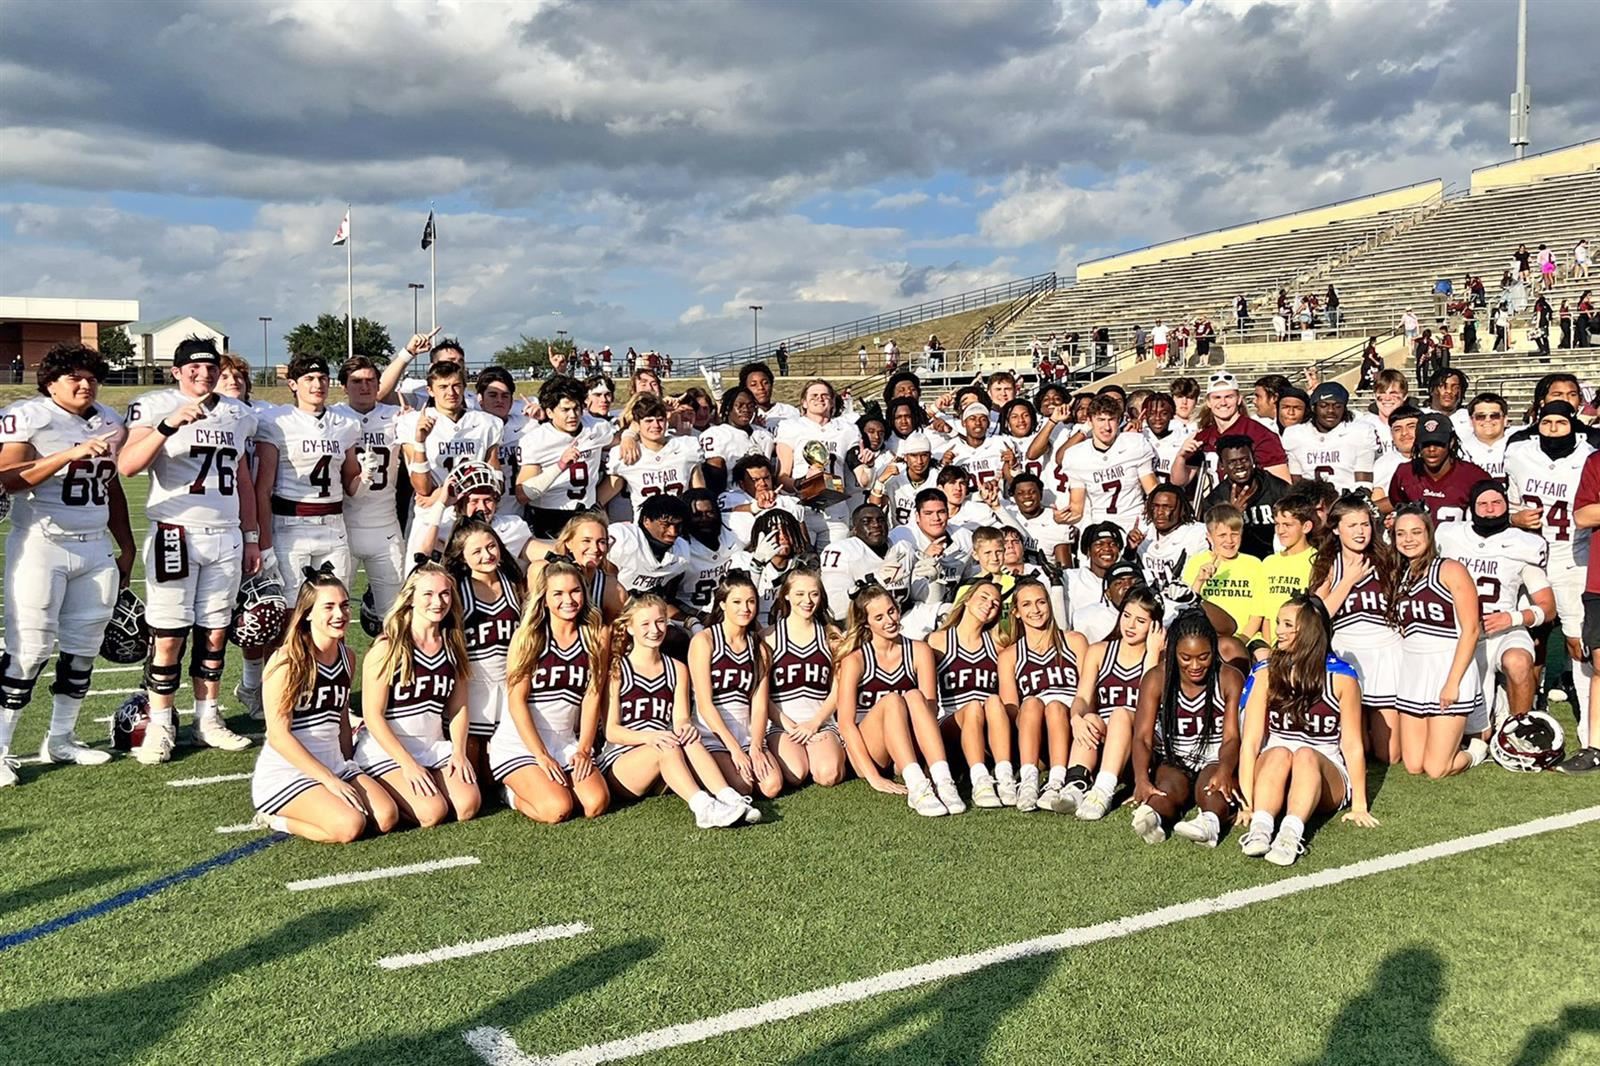 Cy-Fair High School finished with an undefeated 7-0 record to win the District 17-6A championship.